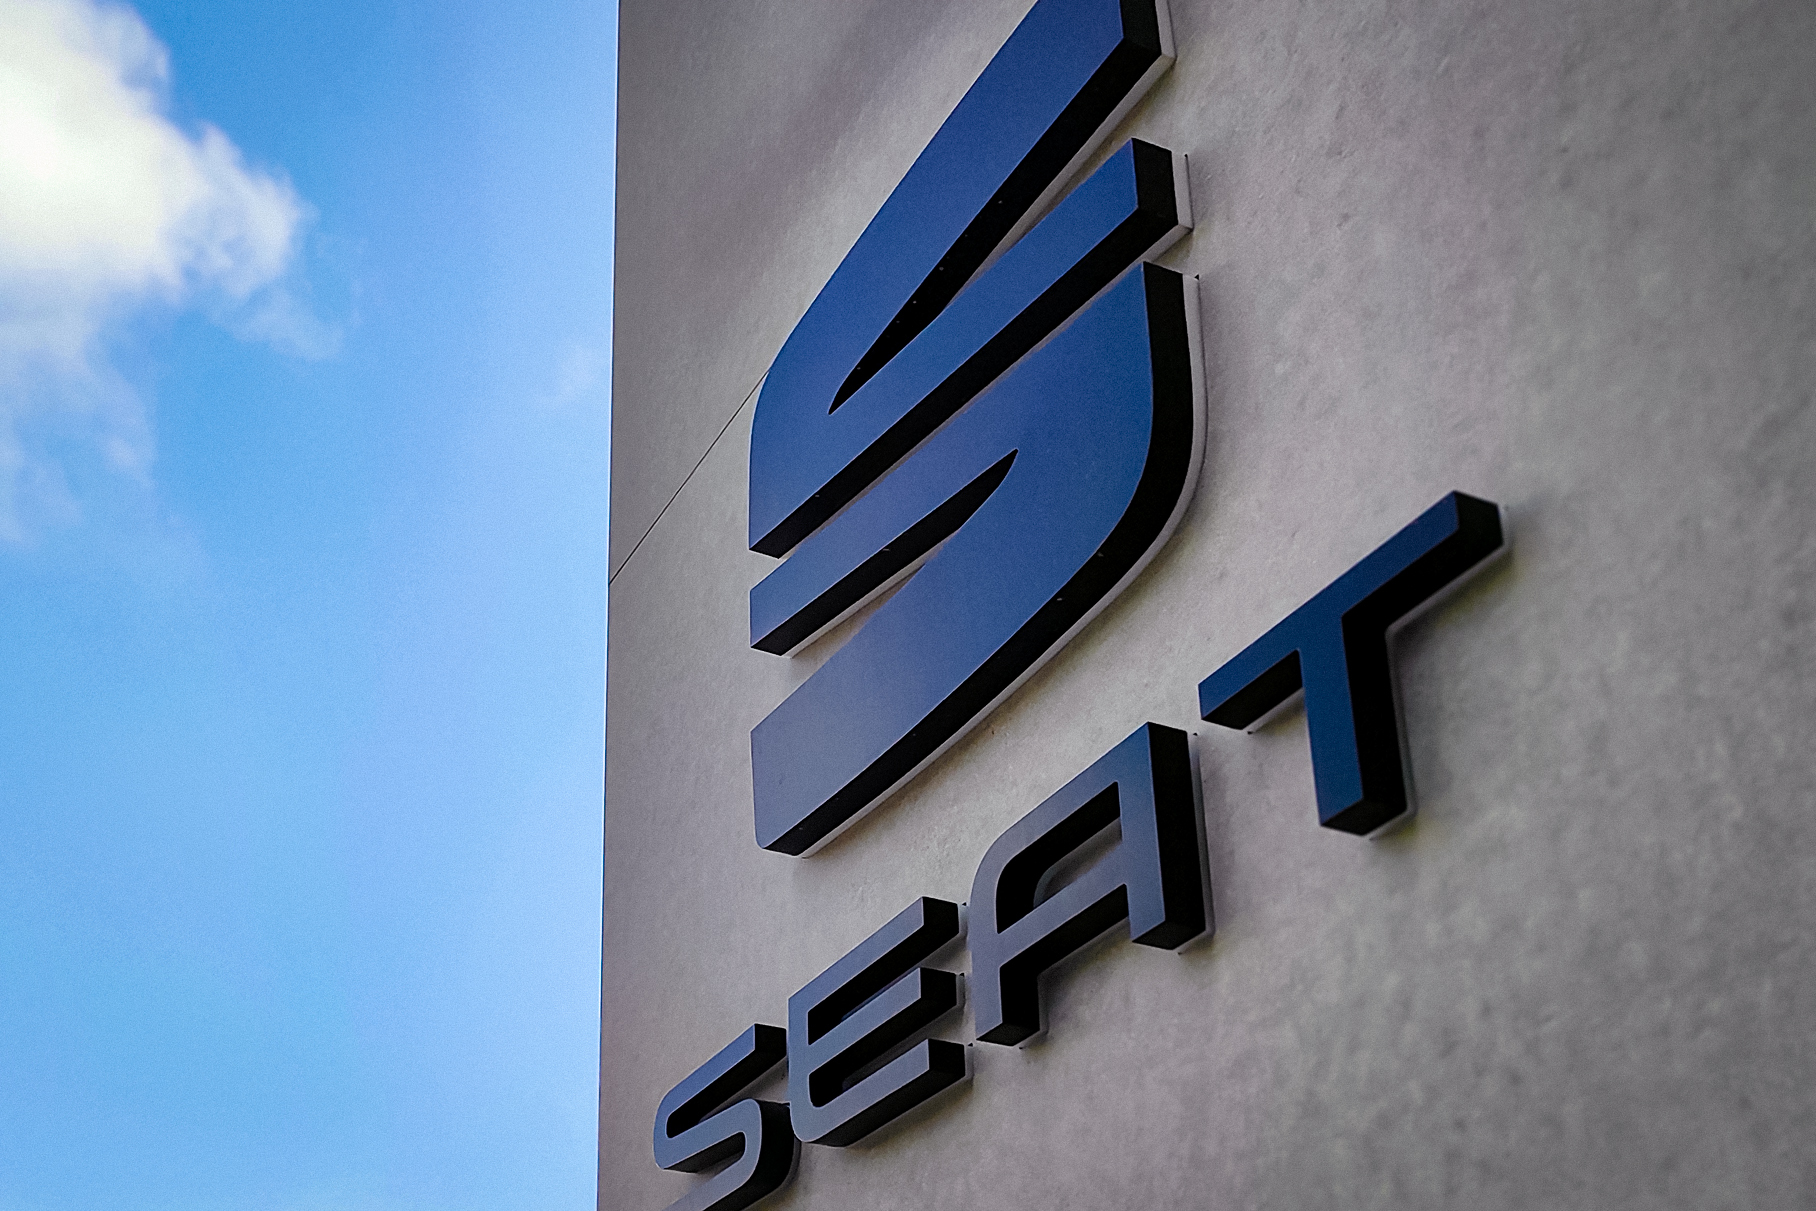 Seat will stop making cars